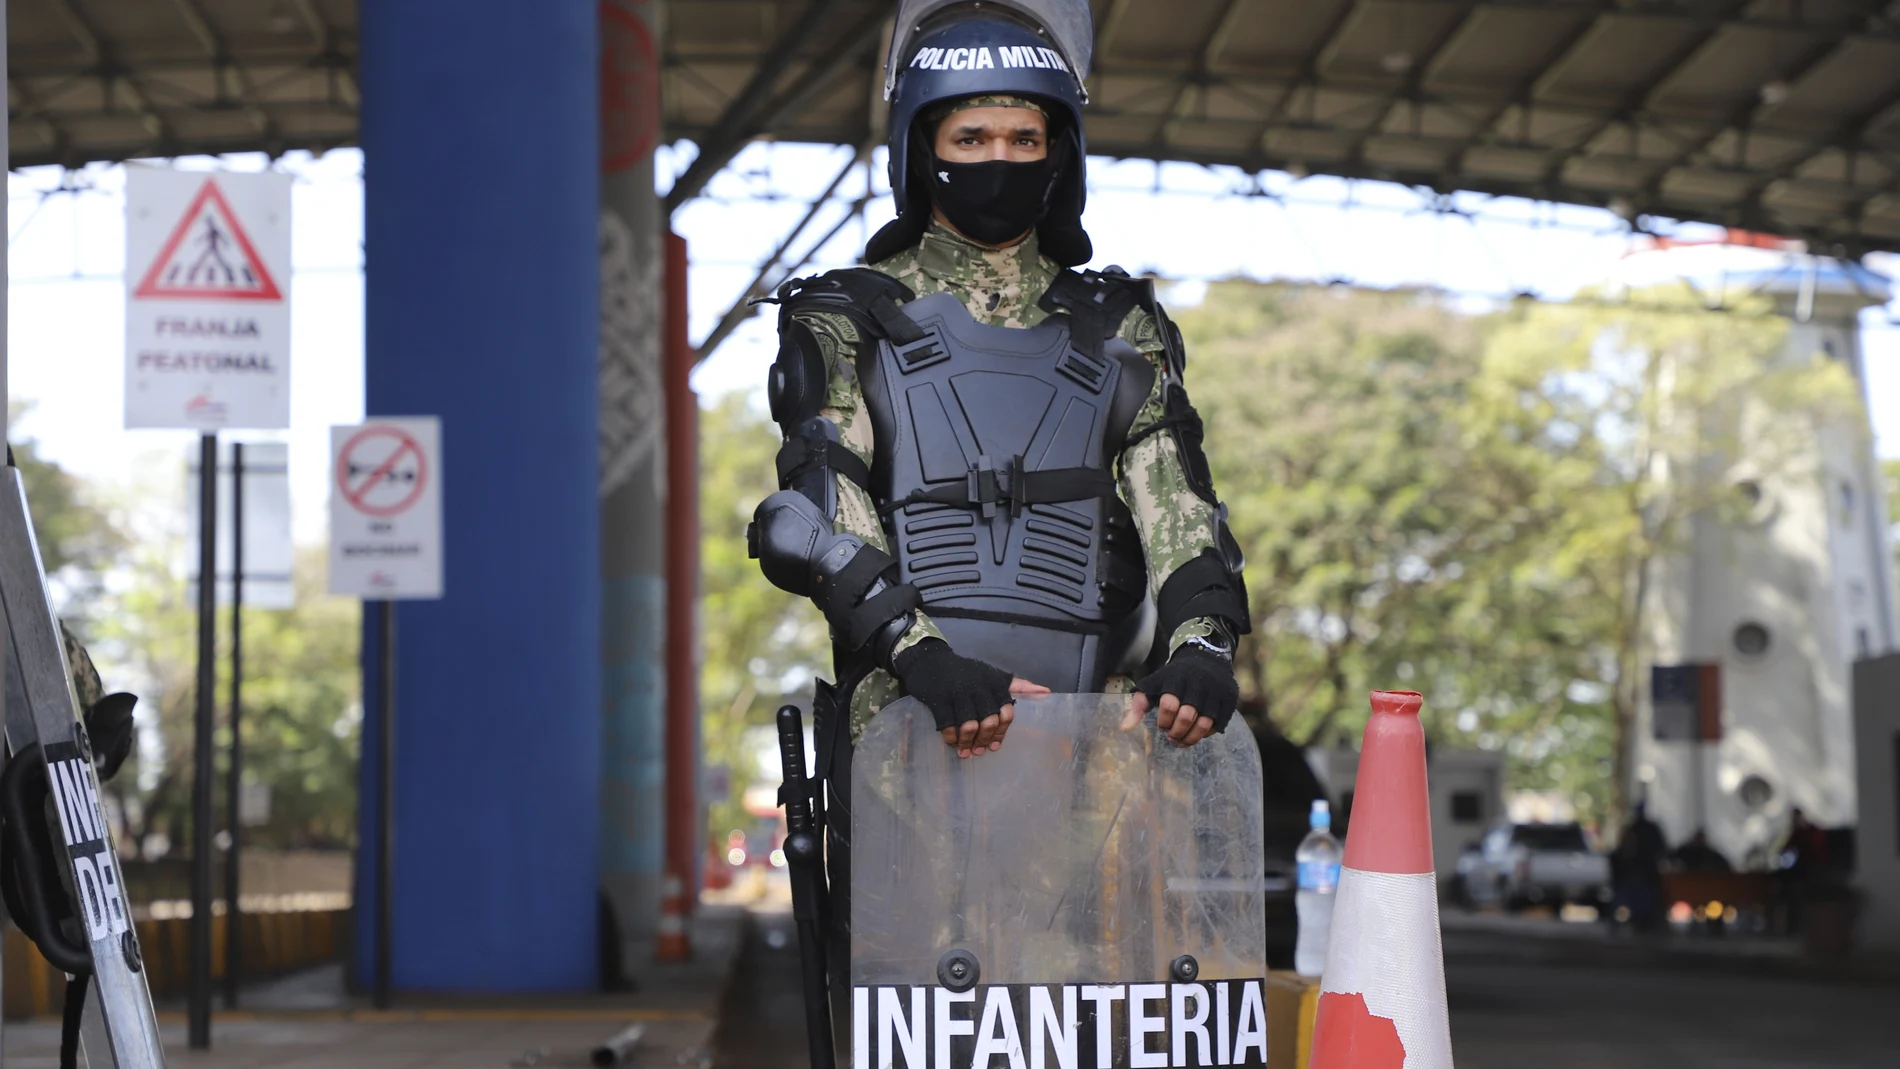 Navy marines stand guard at the entrance of Friendship Bridge that connects Ciudad Del Este, Paraguay, and Brazil's For do Iguazu, Thursday, July 30, 2020. Security was reinforced after Wednesday night's protests against a decreed near-total shutdown of the state, and on Thursday Paraguay eased the plans, allowing some businesses to operate during the day. (AP Photo/Marta Escurra)